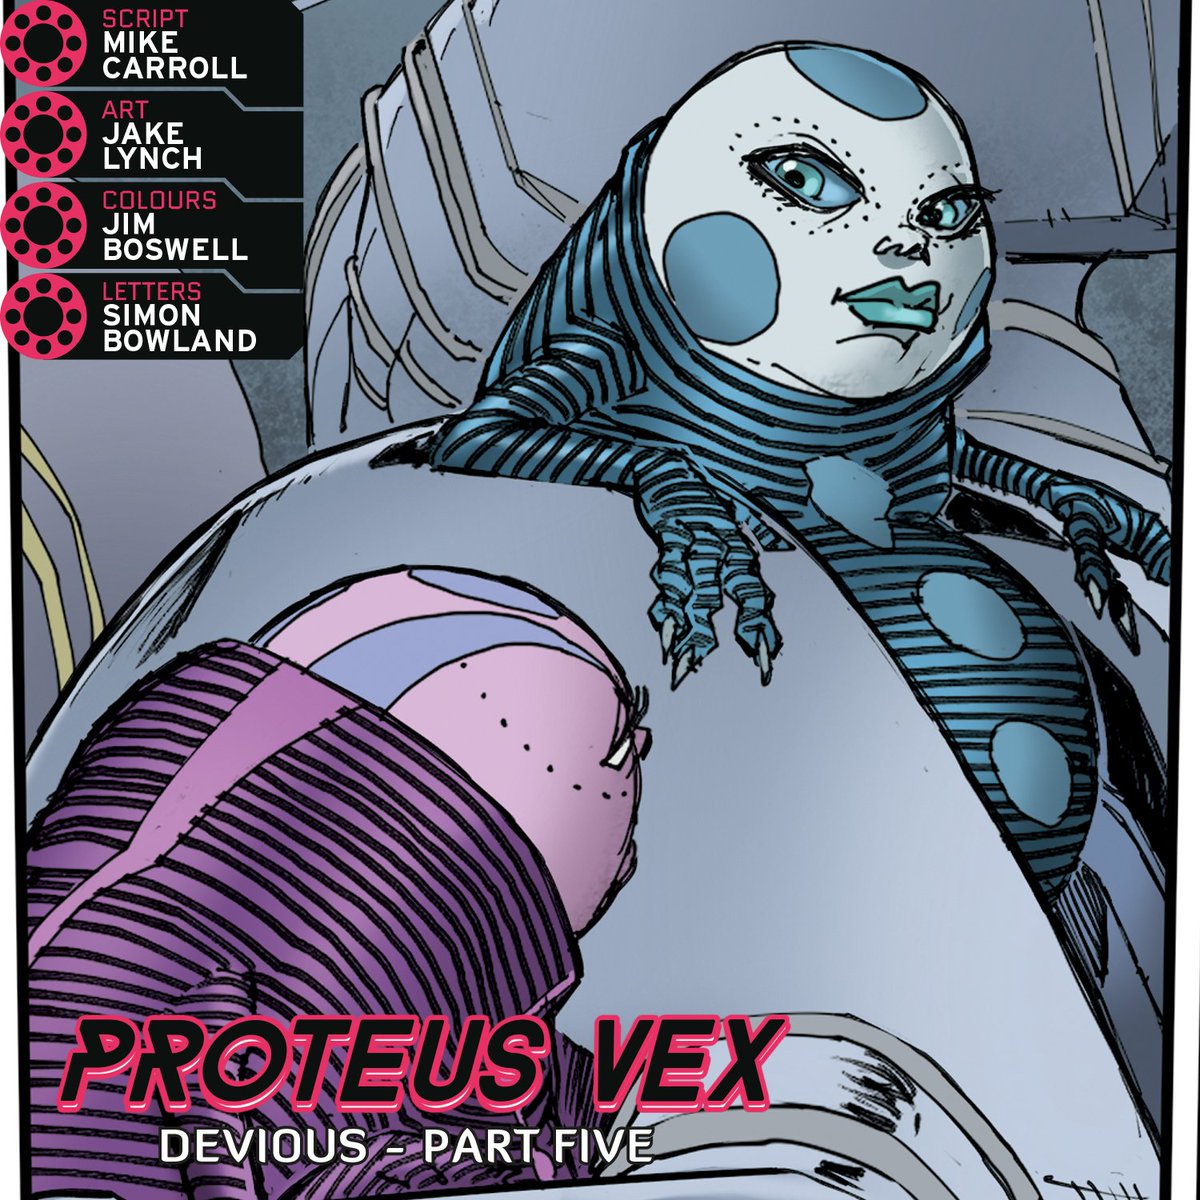 2000 AD Prog 2379 is out on 24th April - tomorrow! - featuring PROTEUS VEX: DEVIOUS, part five by: 📝 Script: @MikeOwenCarroll ✏️ Art: @artdroid_lynch 🎨 Colours: @jimboswellart 💬 Letters: @SimonBowland Subscribe now and get zarjaz free gifts ➡️ bit.ly/2Ws04uc